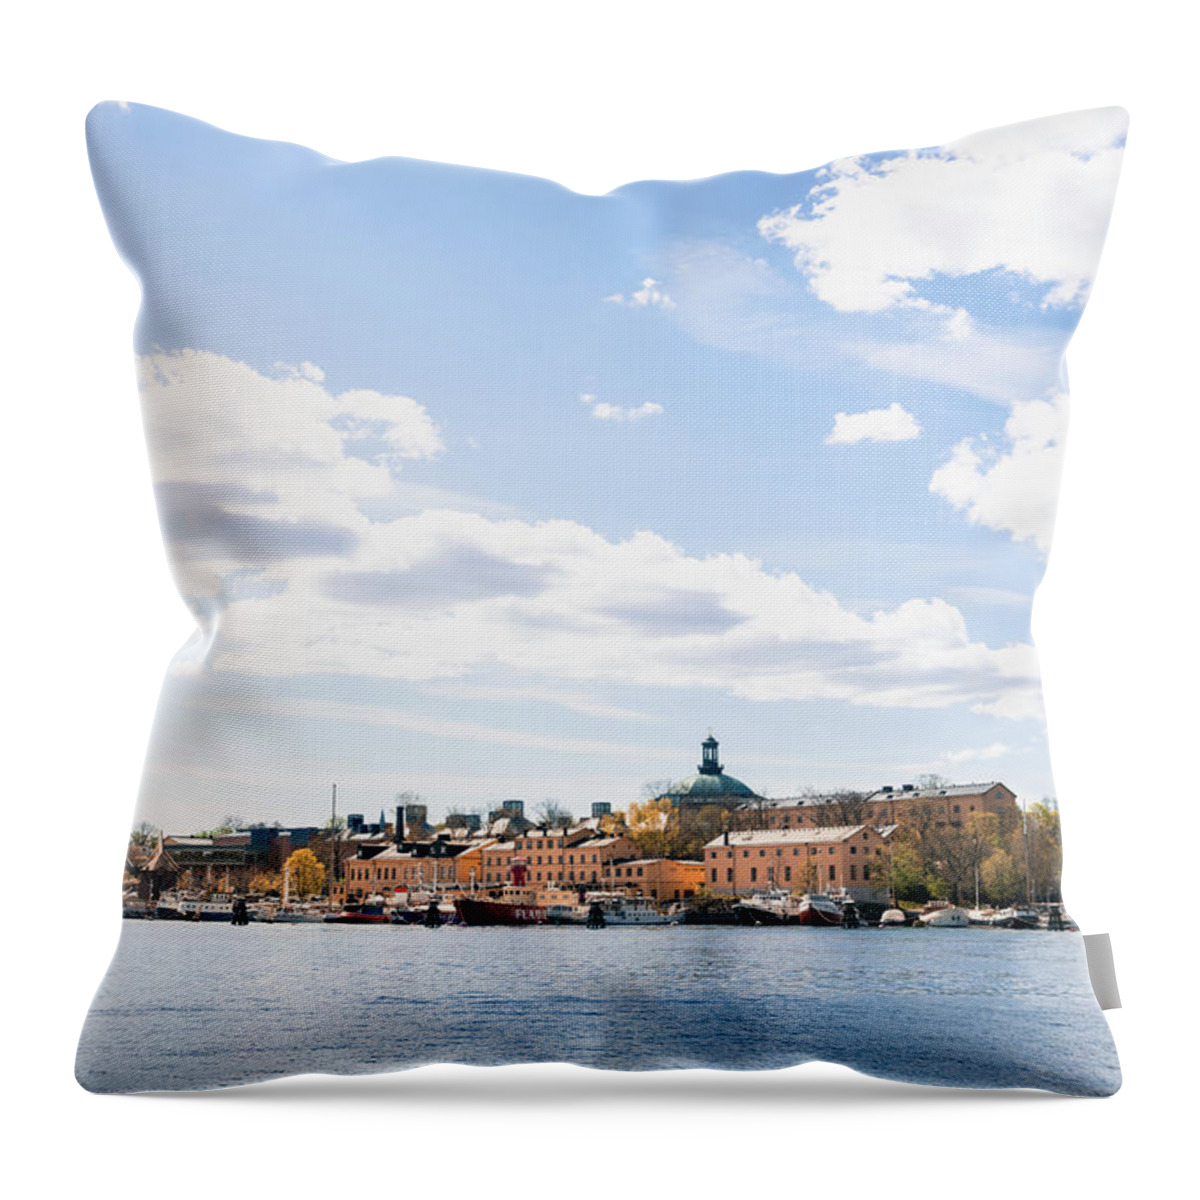 Sweden Throw Pillow featuring the photograph View Of Old Town Of Stockholm by Johner Images